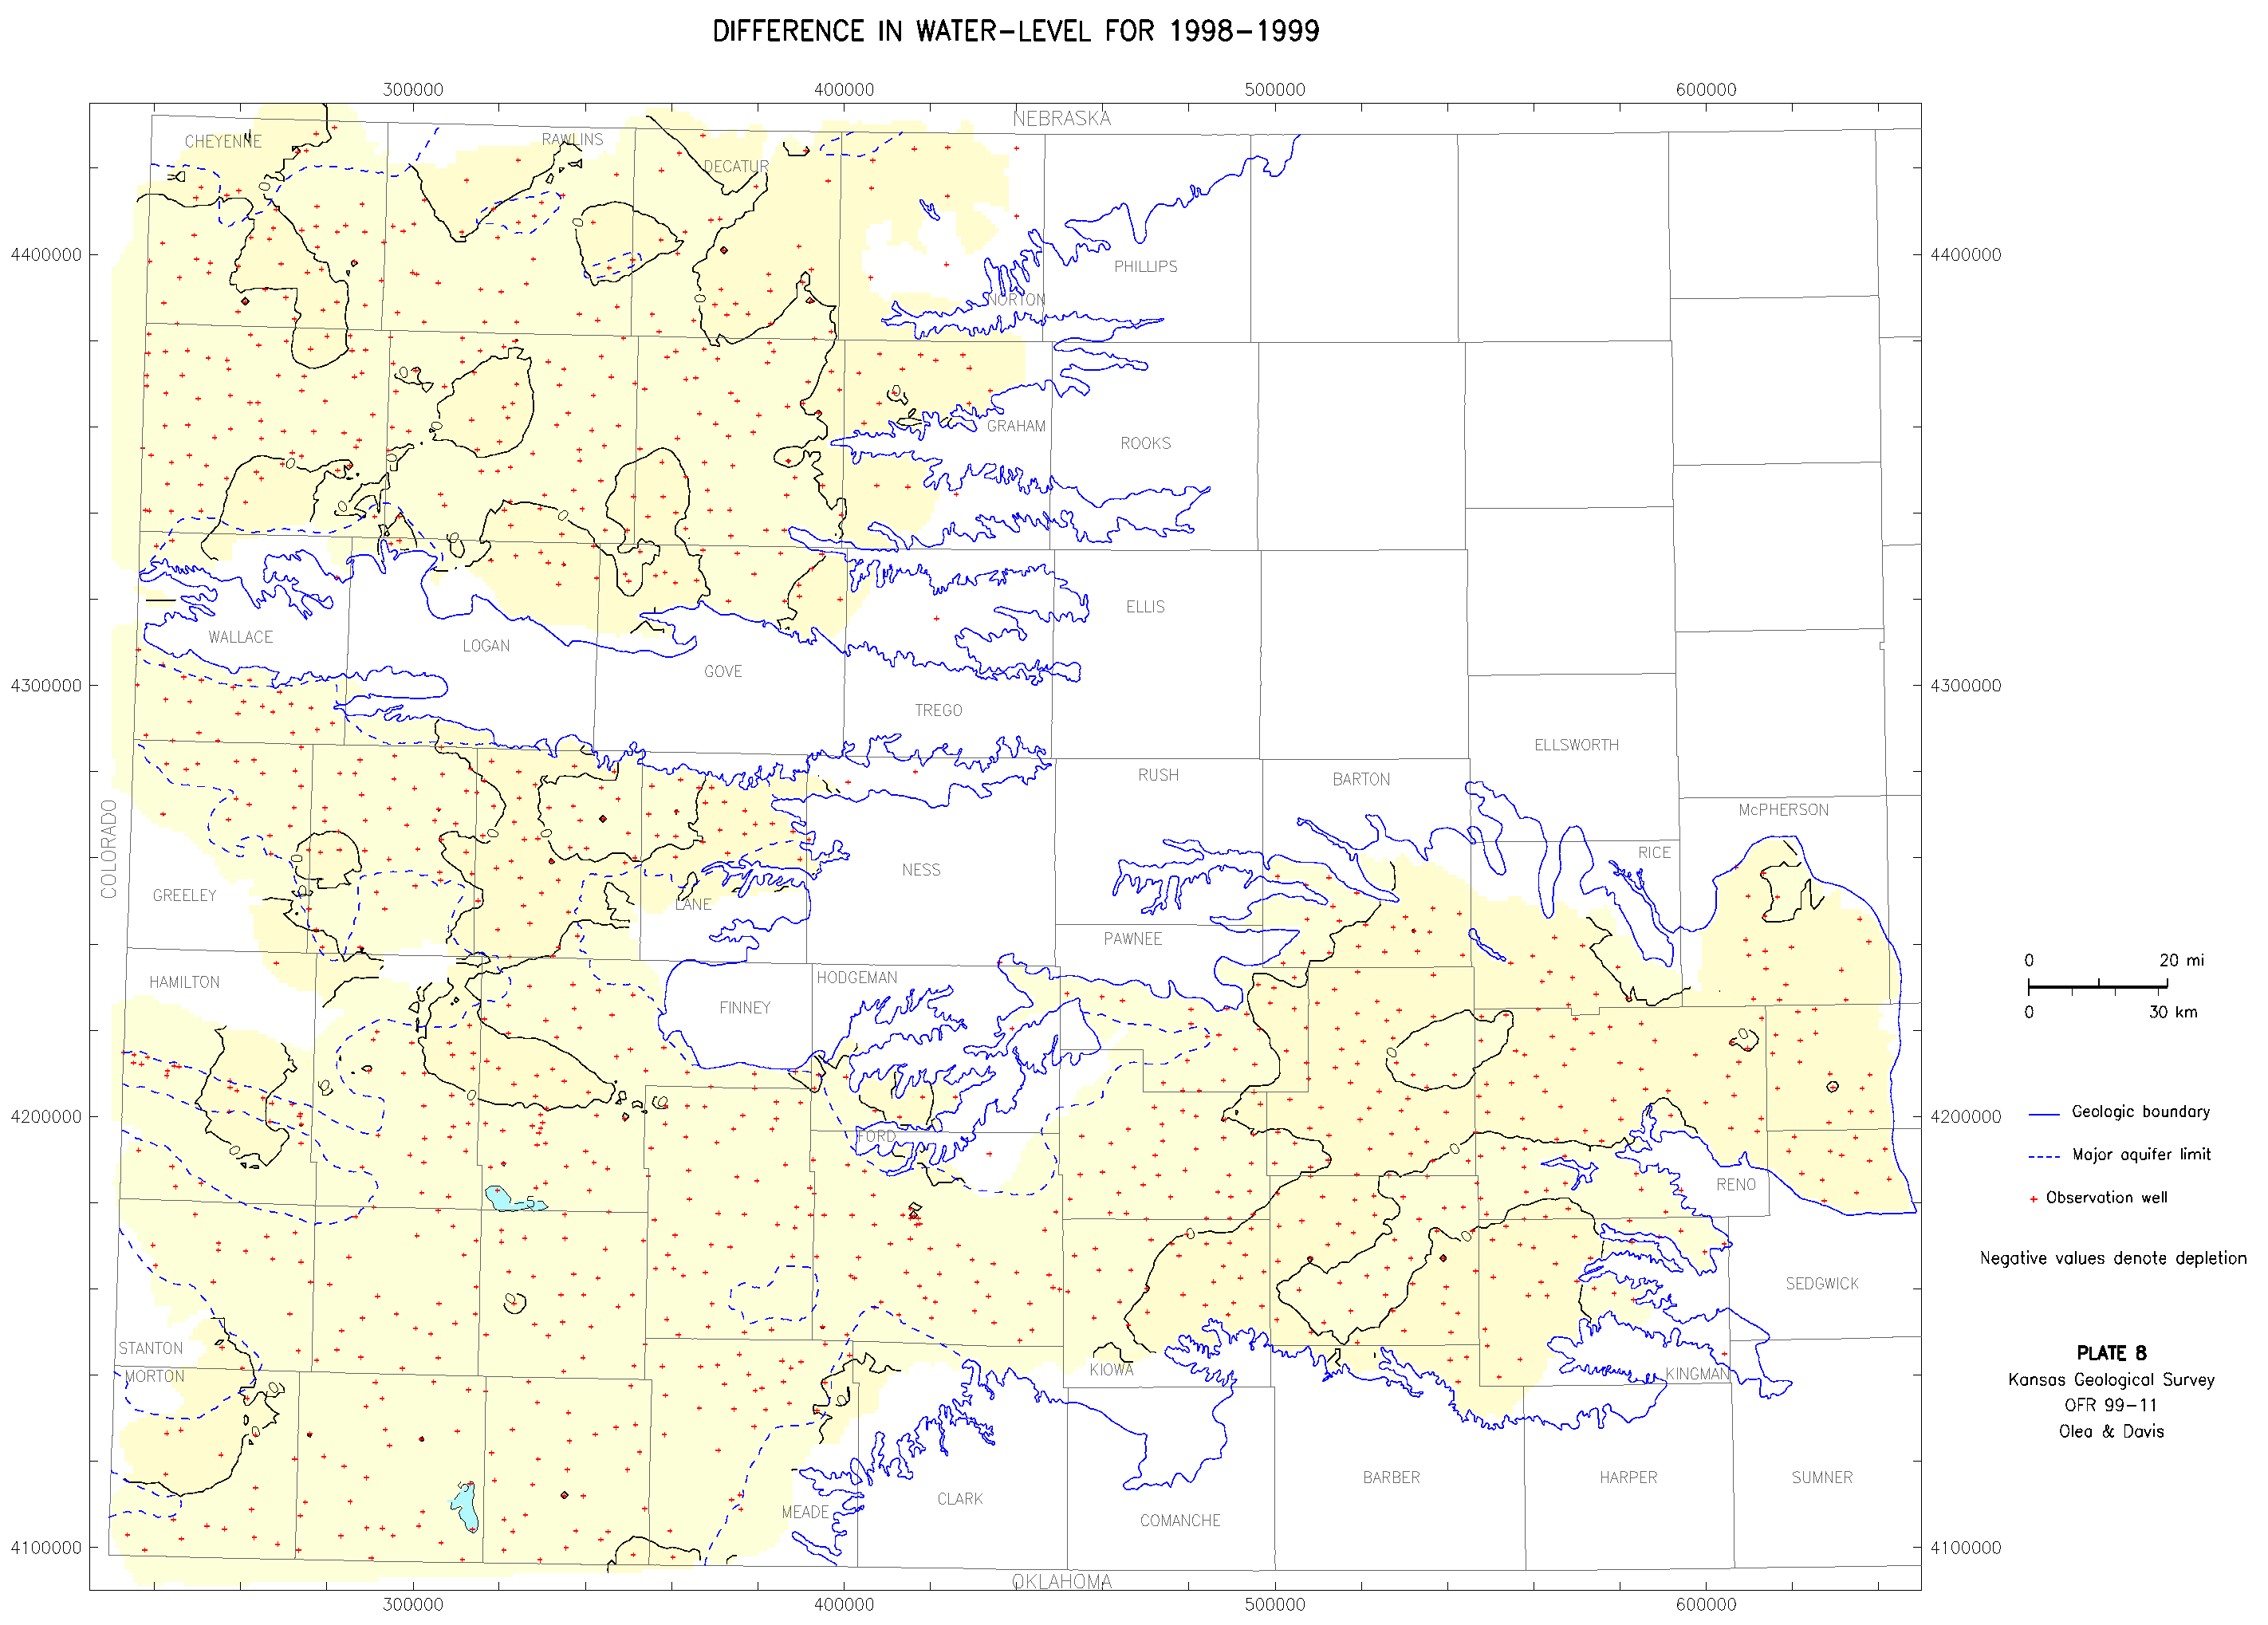 Difference in Water Level, 1998-1999